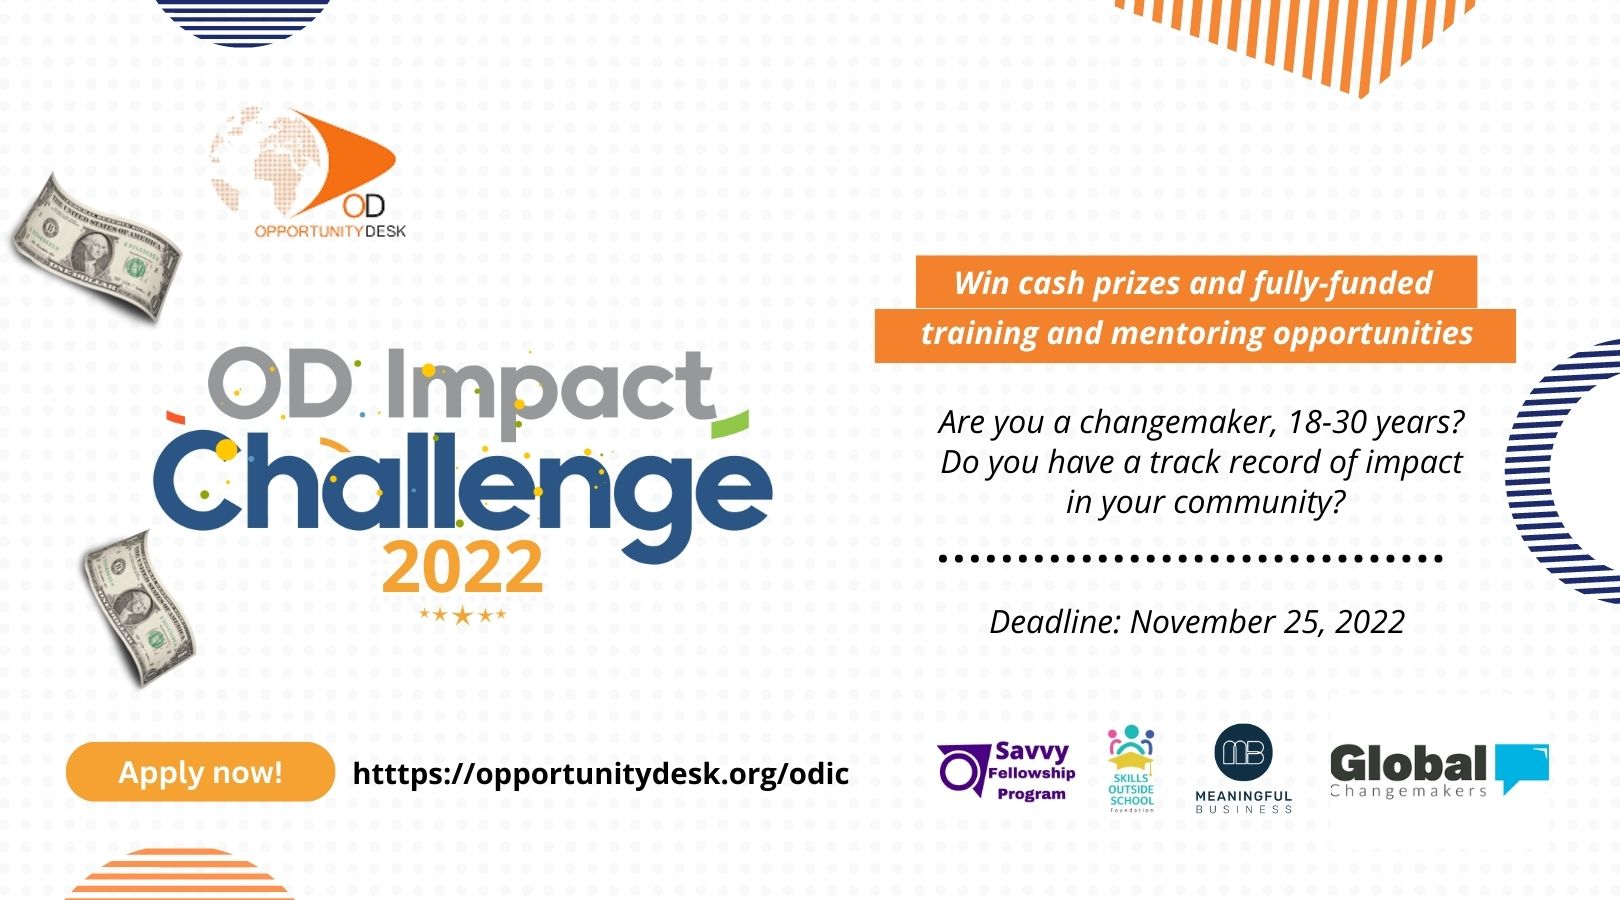 OD Impact Challenge 2022 for Young Changemakers (Win cash prizes and fully-funded learning opportunities)